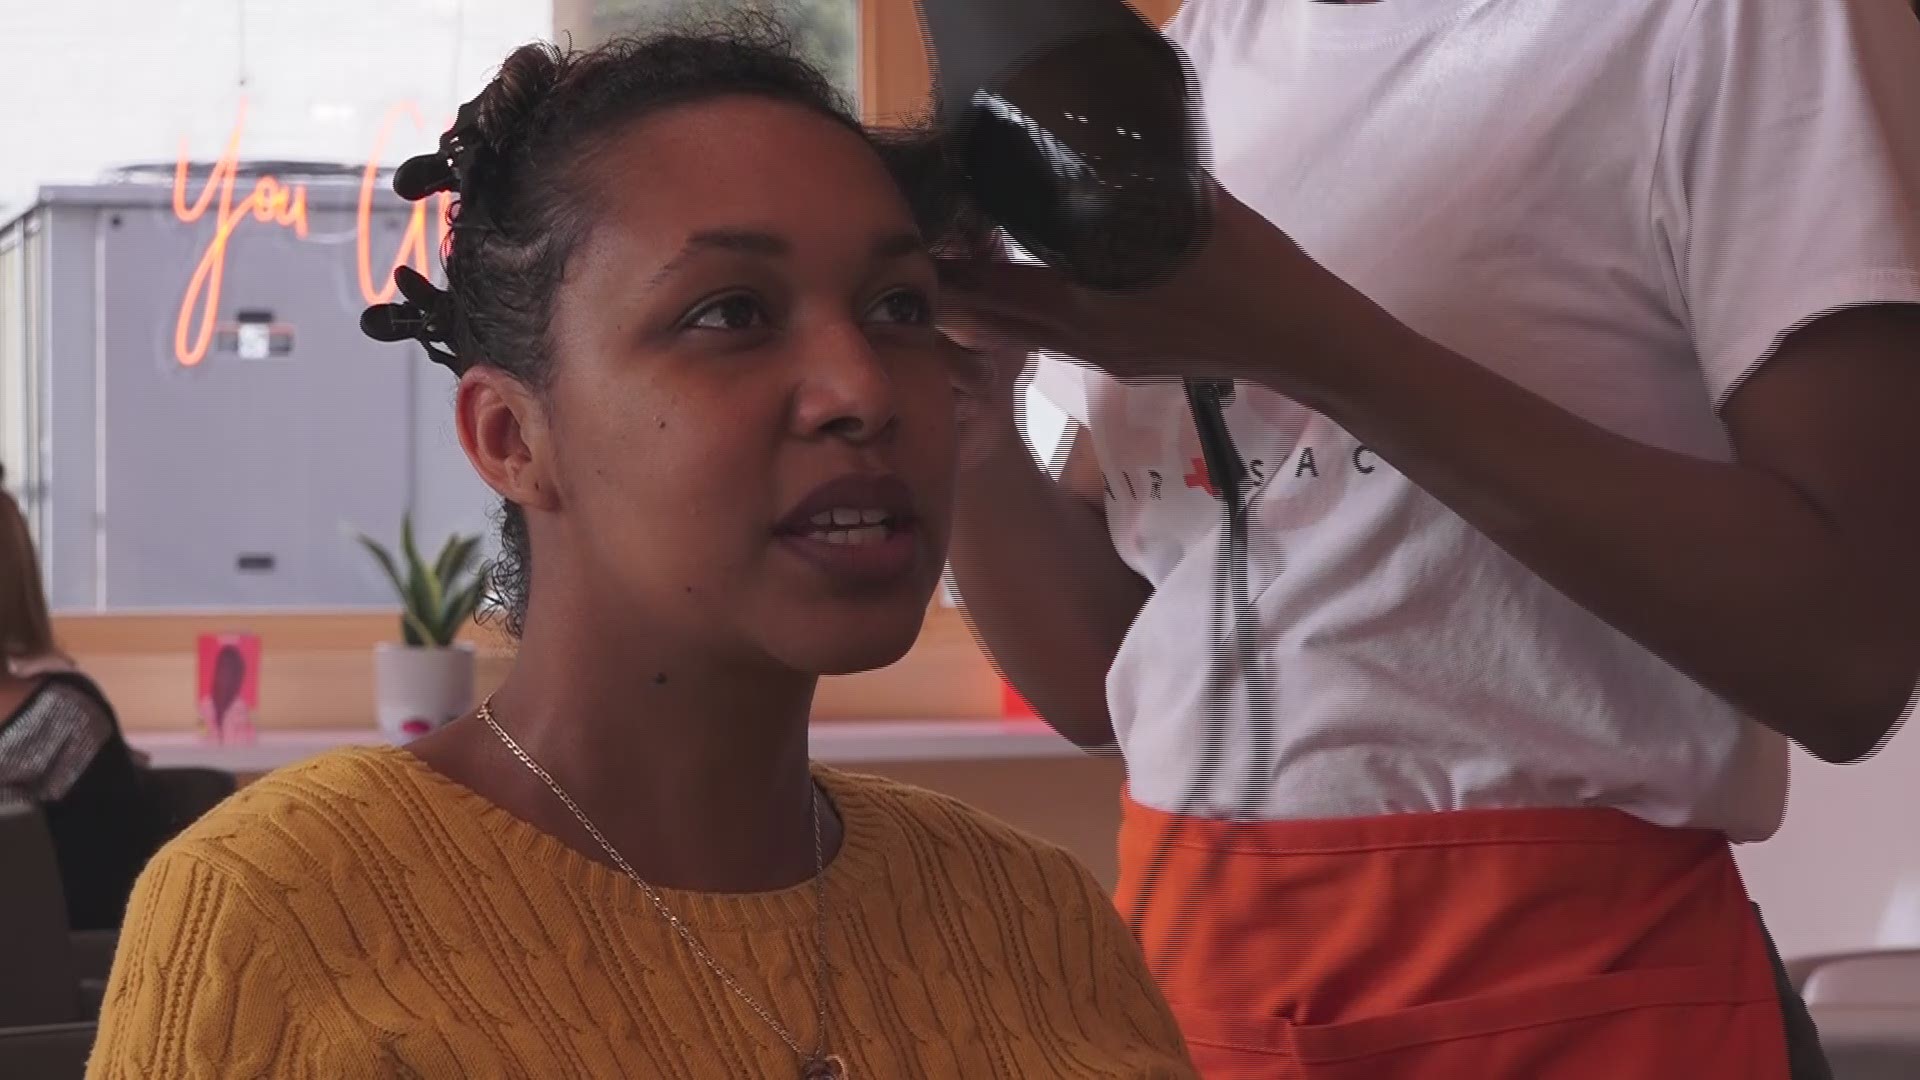 Blow dry bars are not new, but a new business in College Park promises to offer a different experience for women of all ethnic backgrounds and hair types.